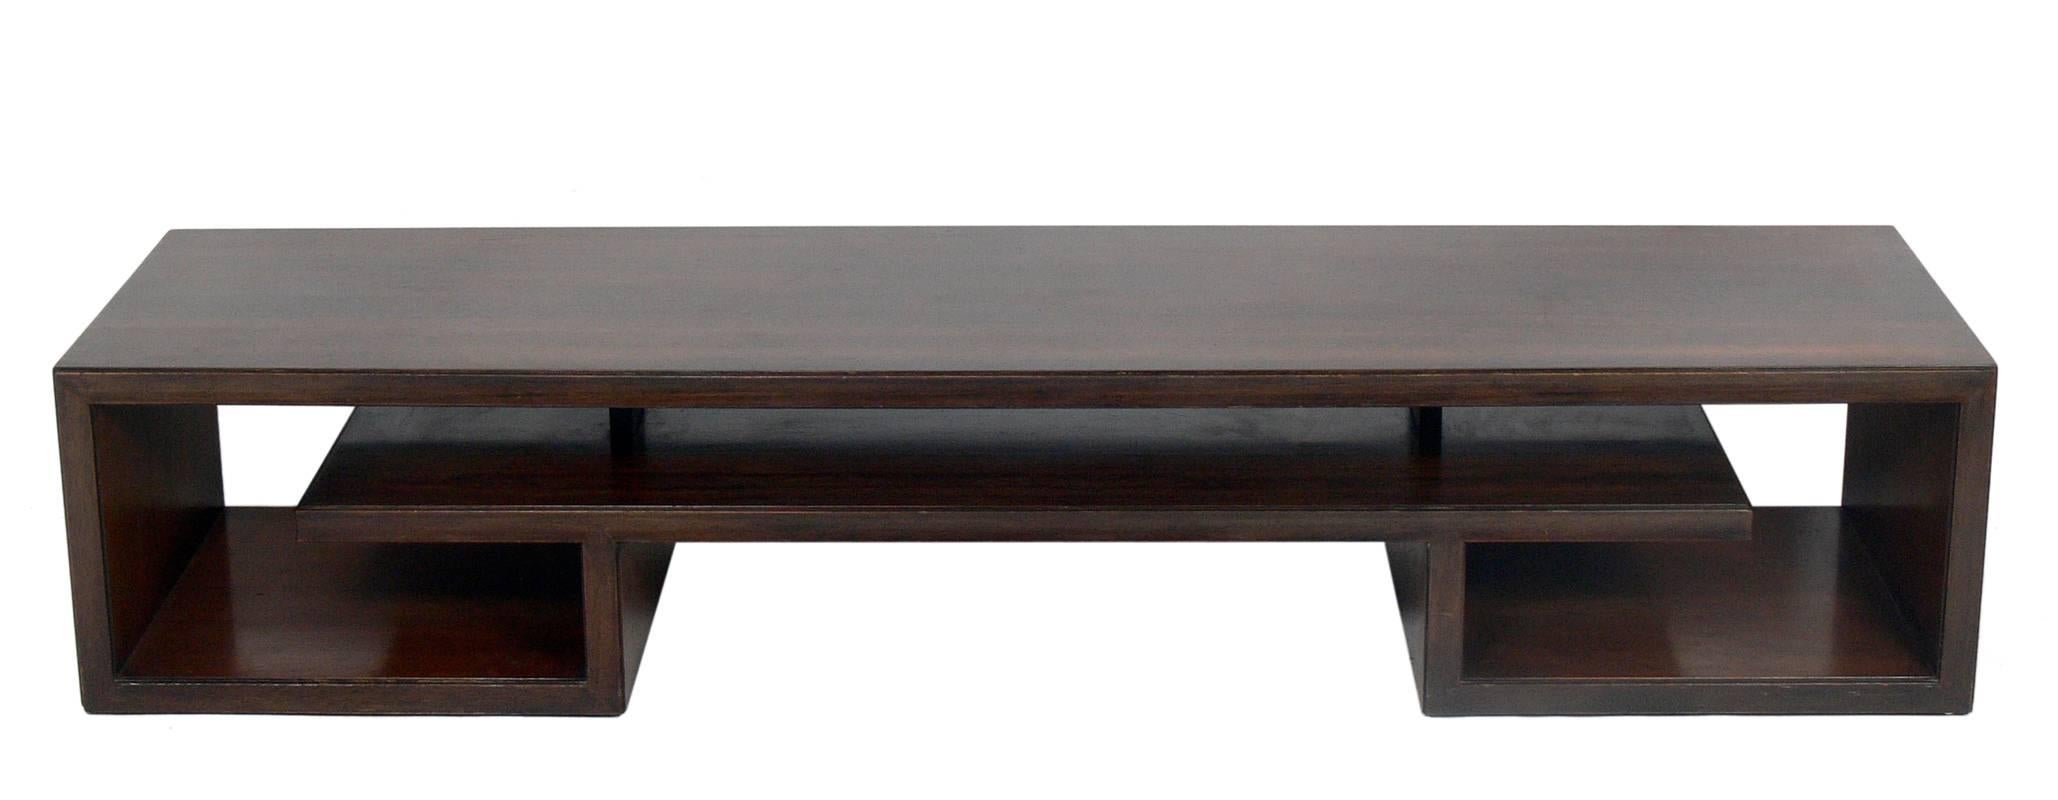 Asian Form Rosewood Coffee Table or Bench, designed by Paul Frankl for Johnson Furniture, American, circa 1950's. It exhibits an elegant Asian scroll design with beautifully grained rosewood. It is a versatile size and can be used as a coffee table